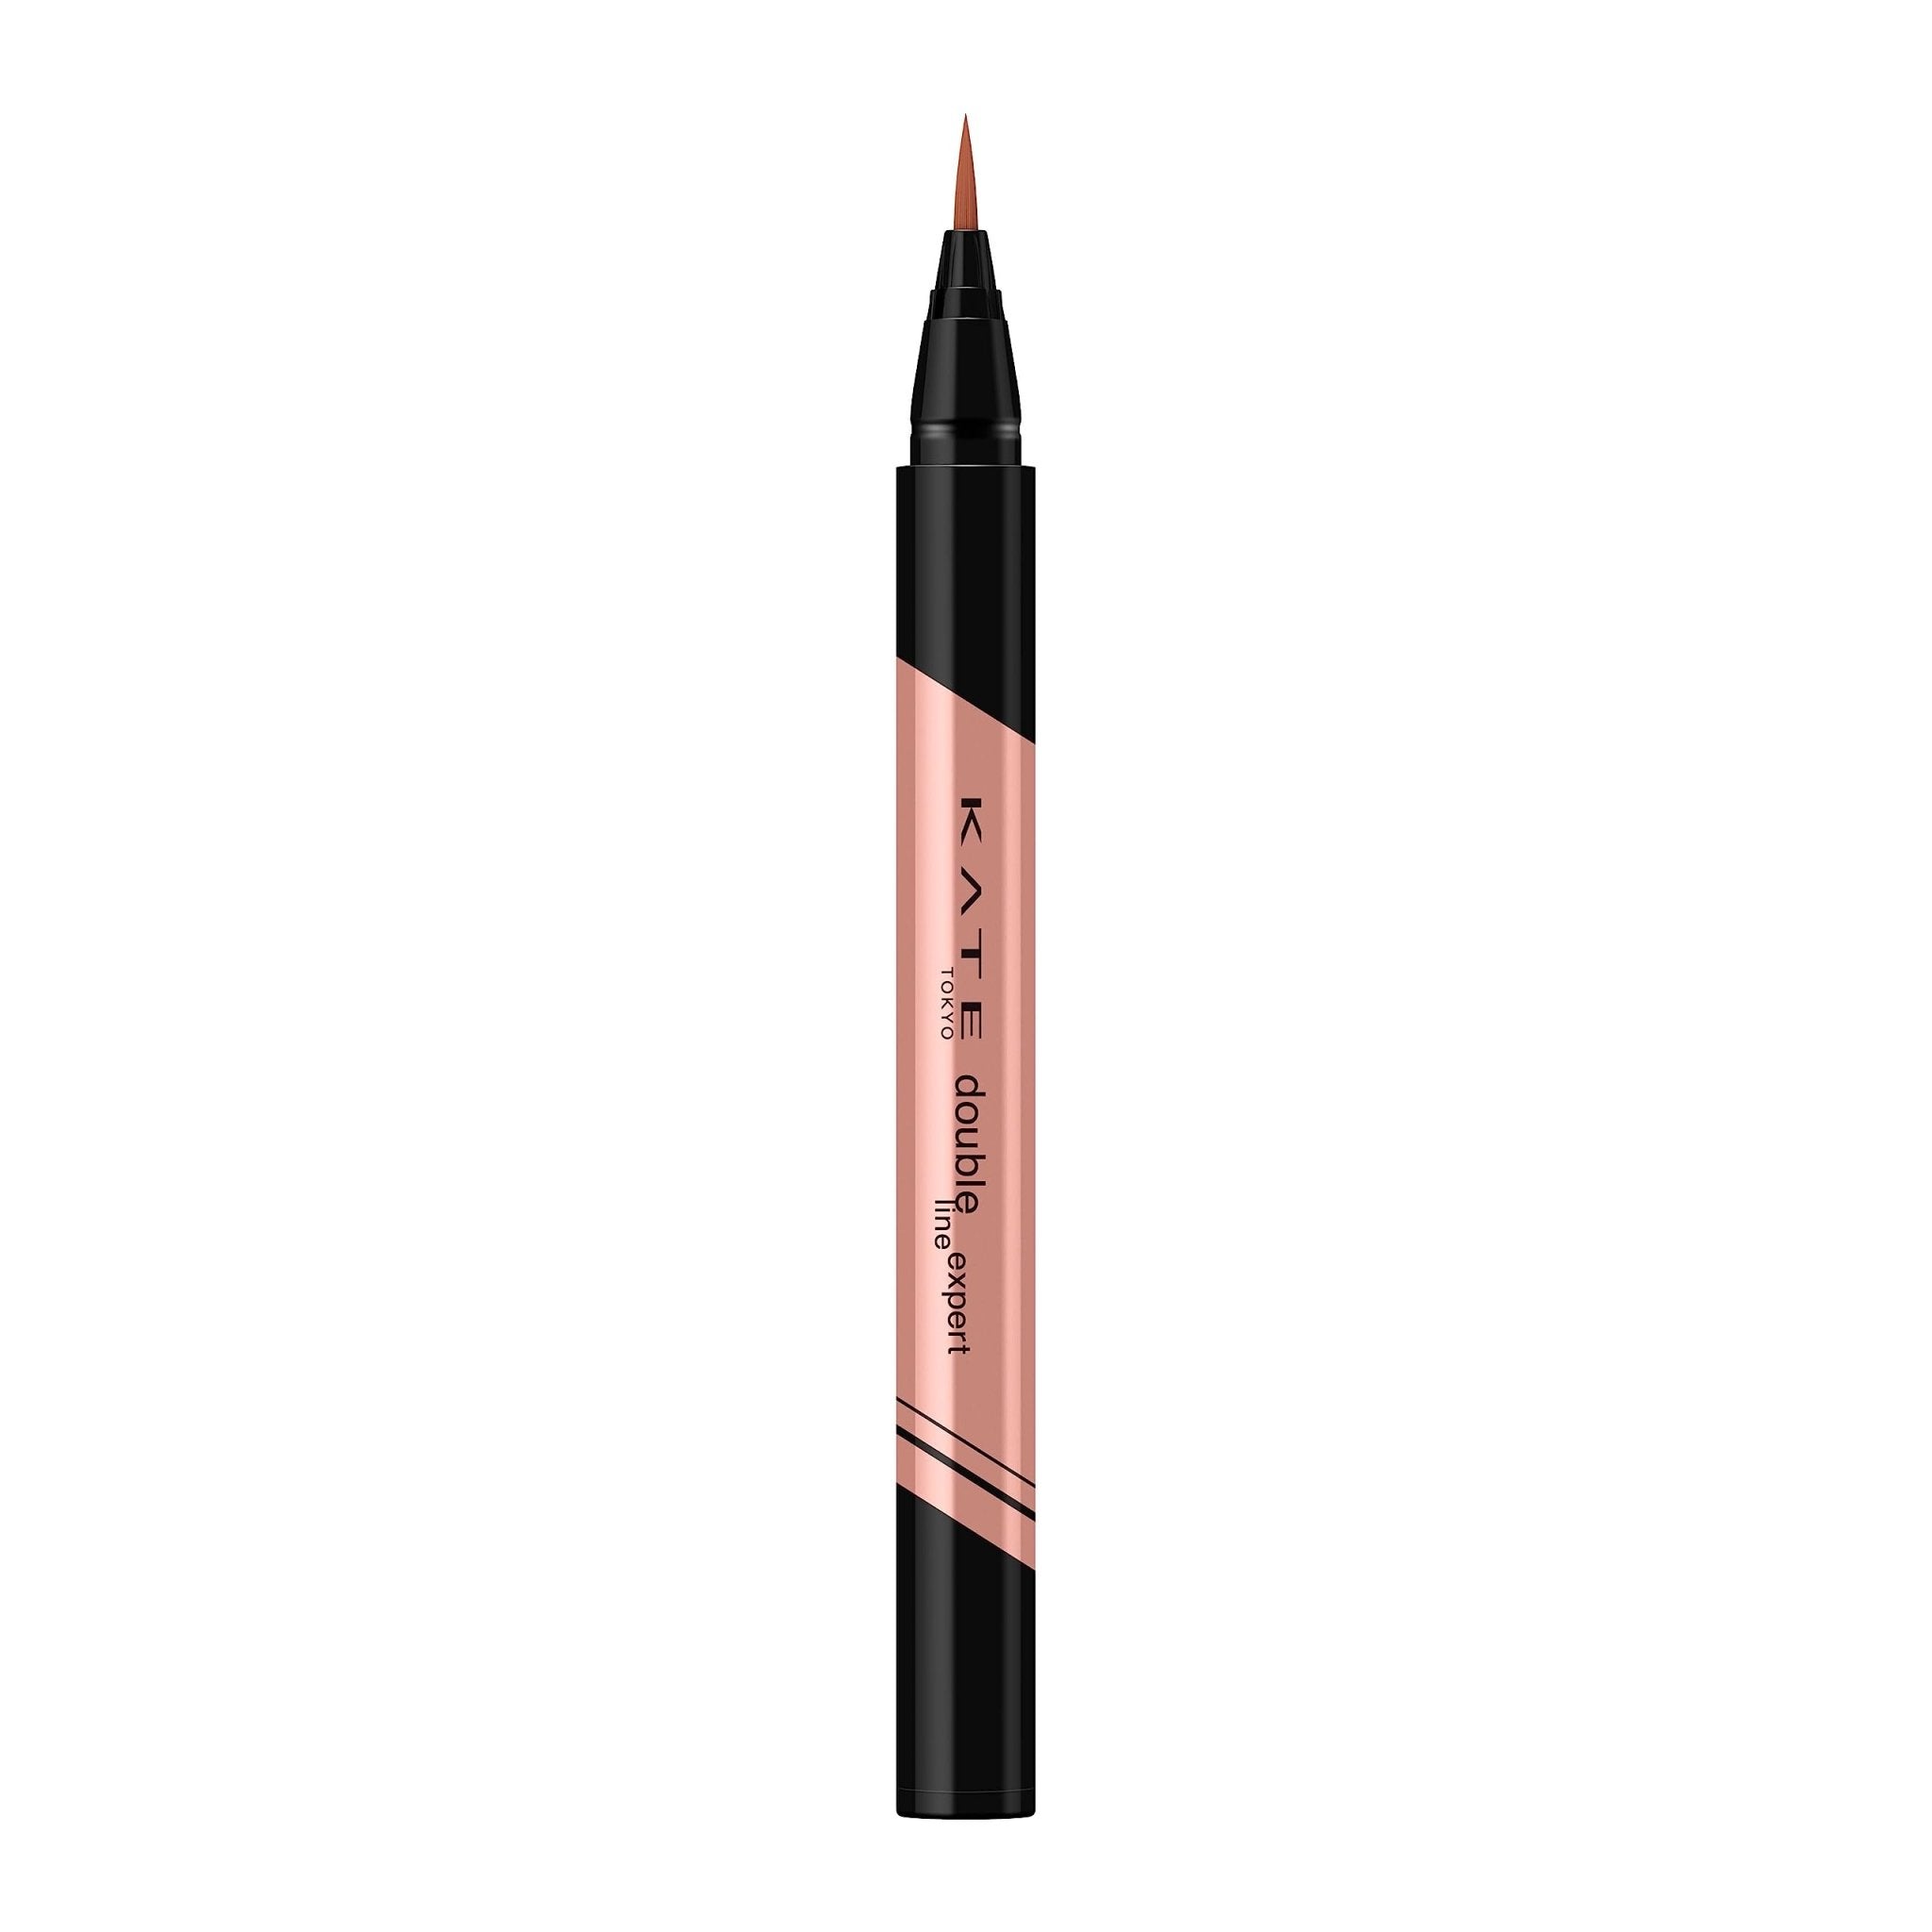 Kate Double Line Expert Pencil in Bloody Shade Color OR - 1